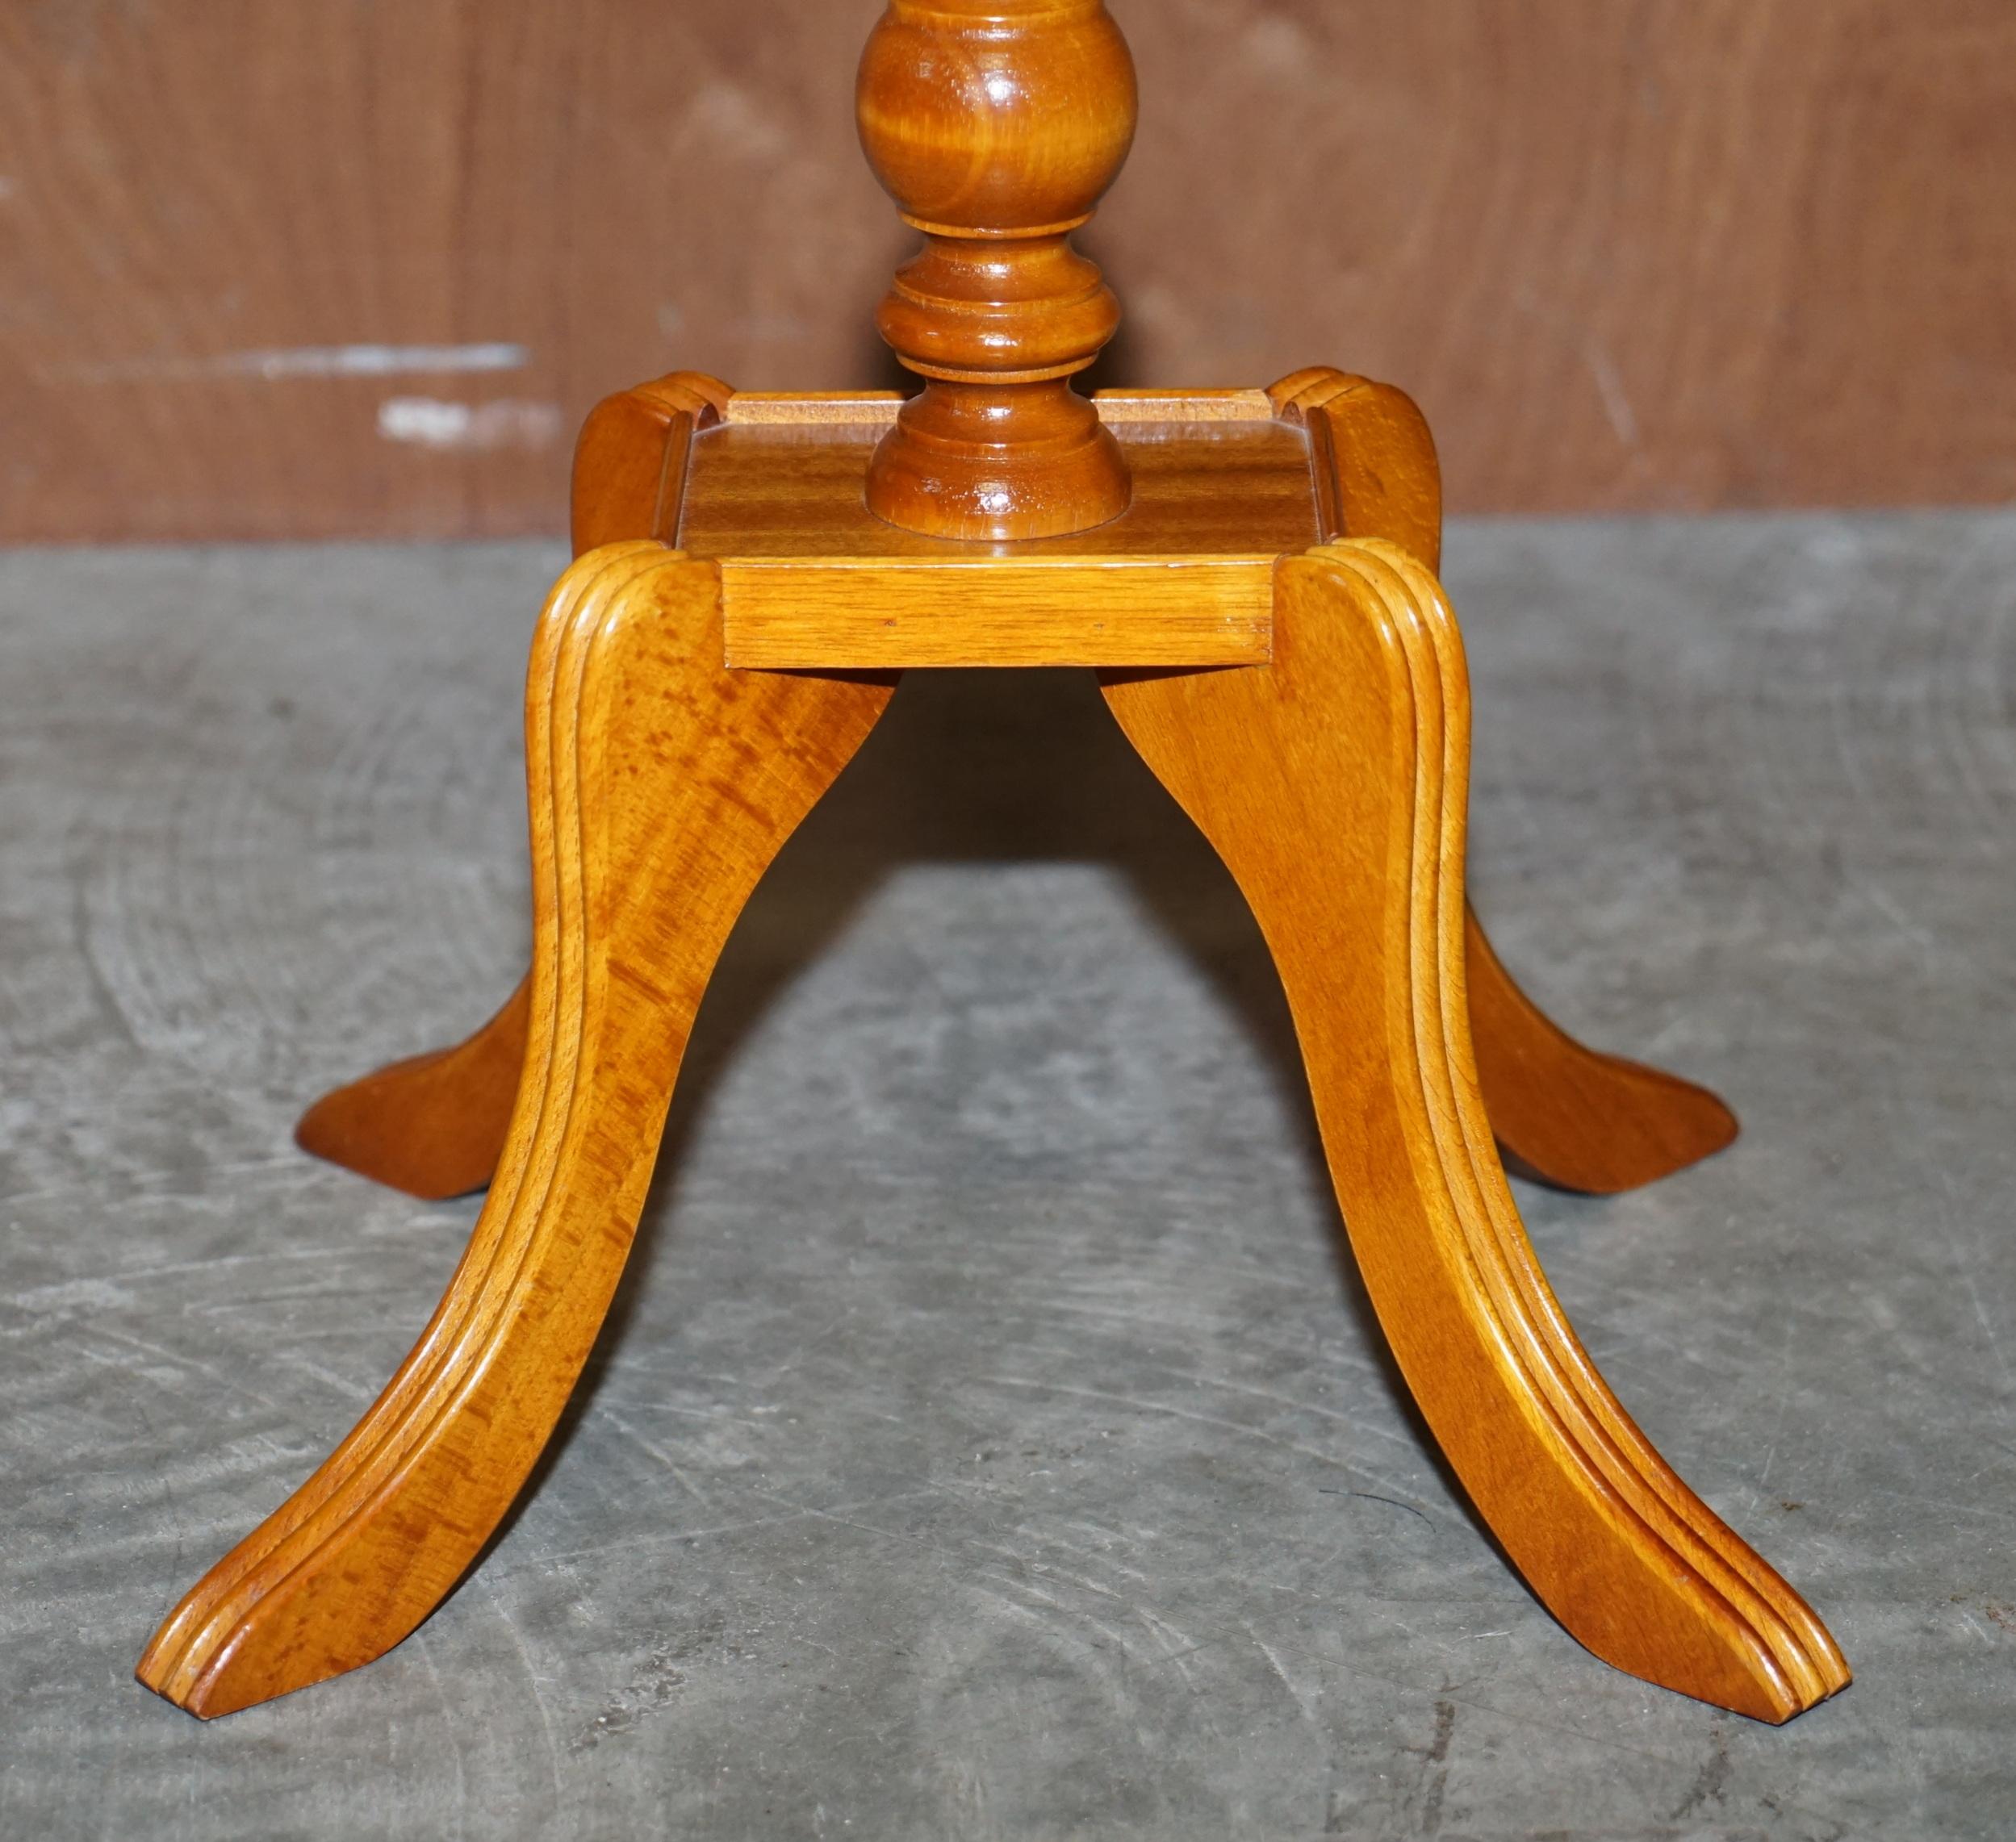 20th Century Sublime Hardwood Wood Beresford & Hicks Side End Lamp Table with Gallery Rail For Sale